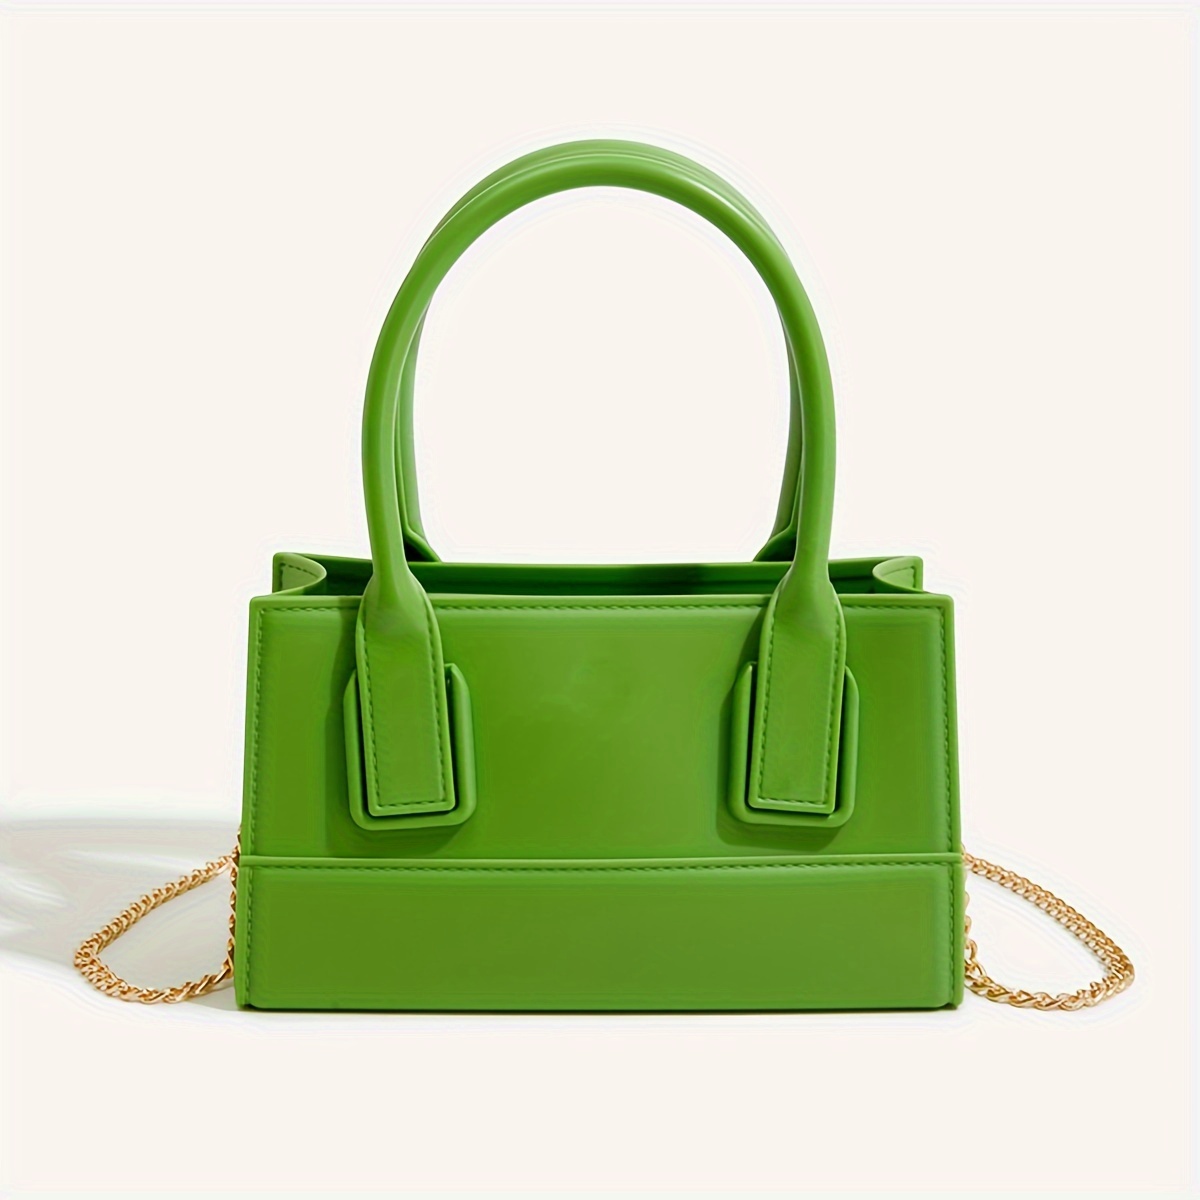 Luxury Designer Square Bag With Versatile Chain Strap For Women And Men  Small, Large, And V Beauty Myntra Handbags With Crossbody And Messenger  Options From Forever_bags, $47.27